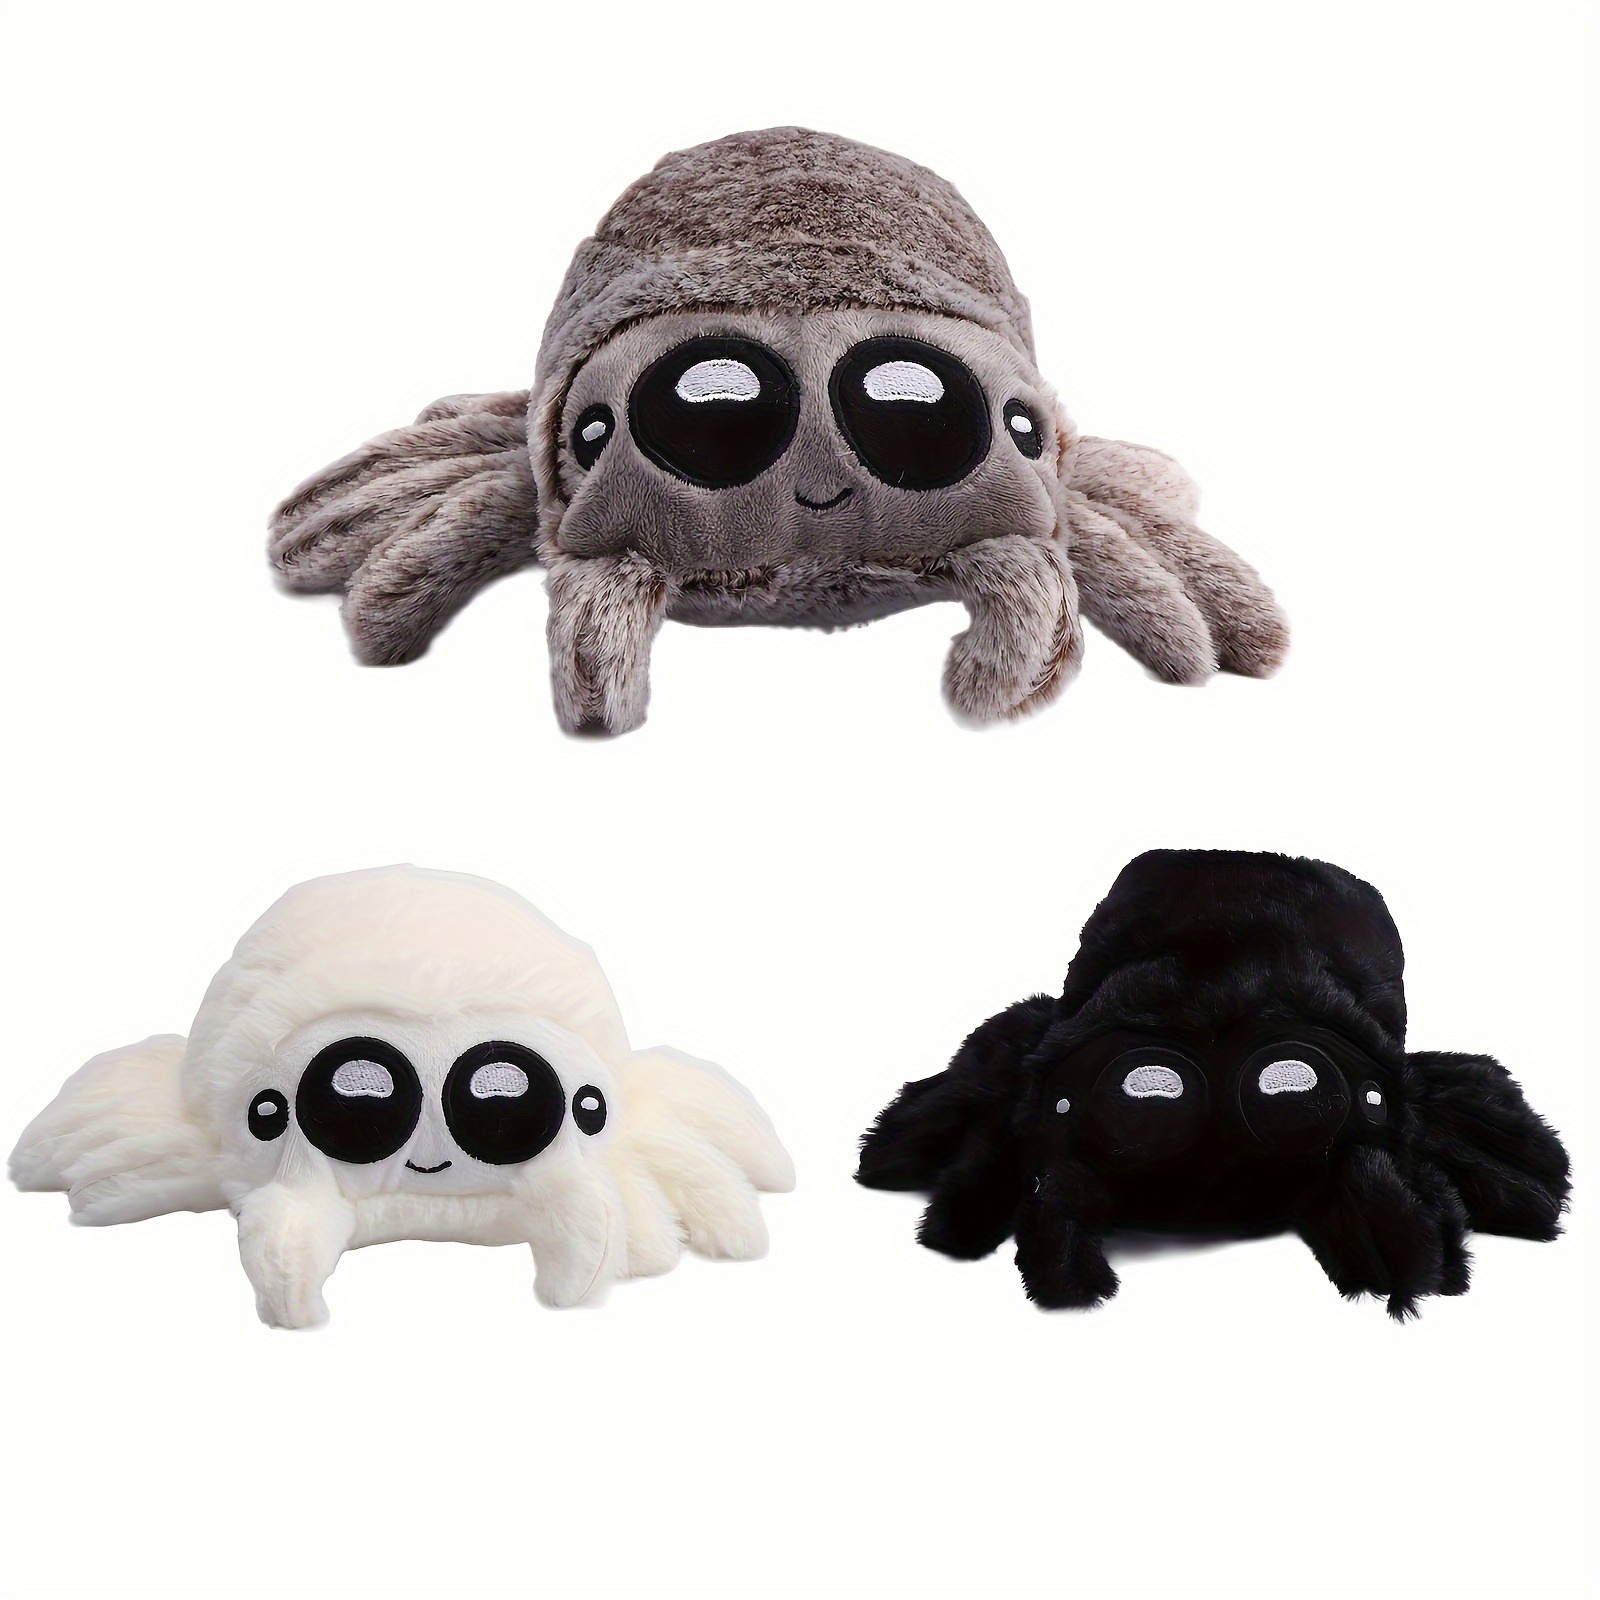 

Cute Spider Plush Stuffed Animal Toy - Perfect Gift For Spider Enthusiasts - Soft And Huggable Halloween Companion For Ages 14+